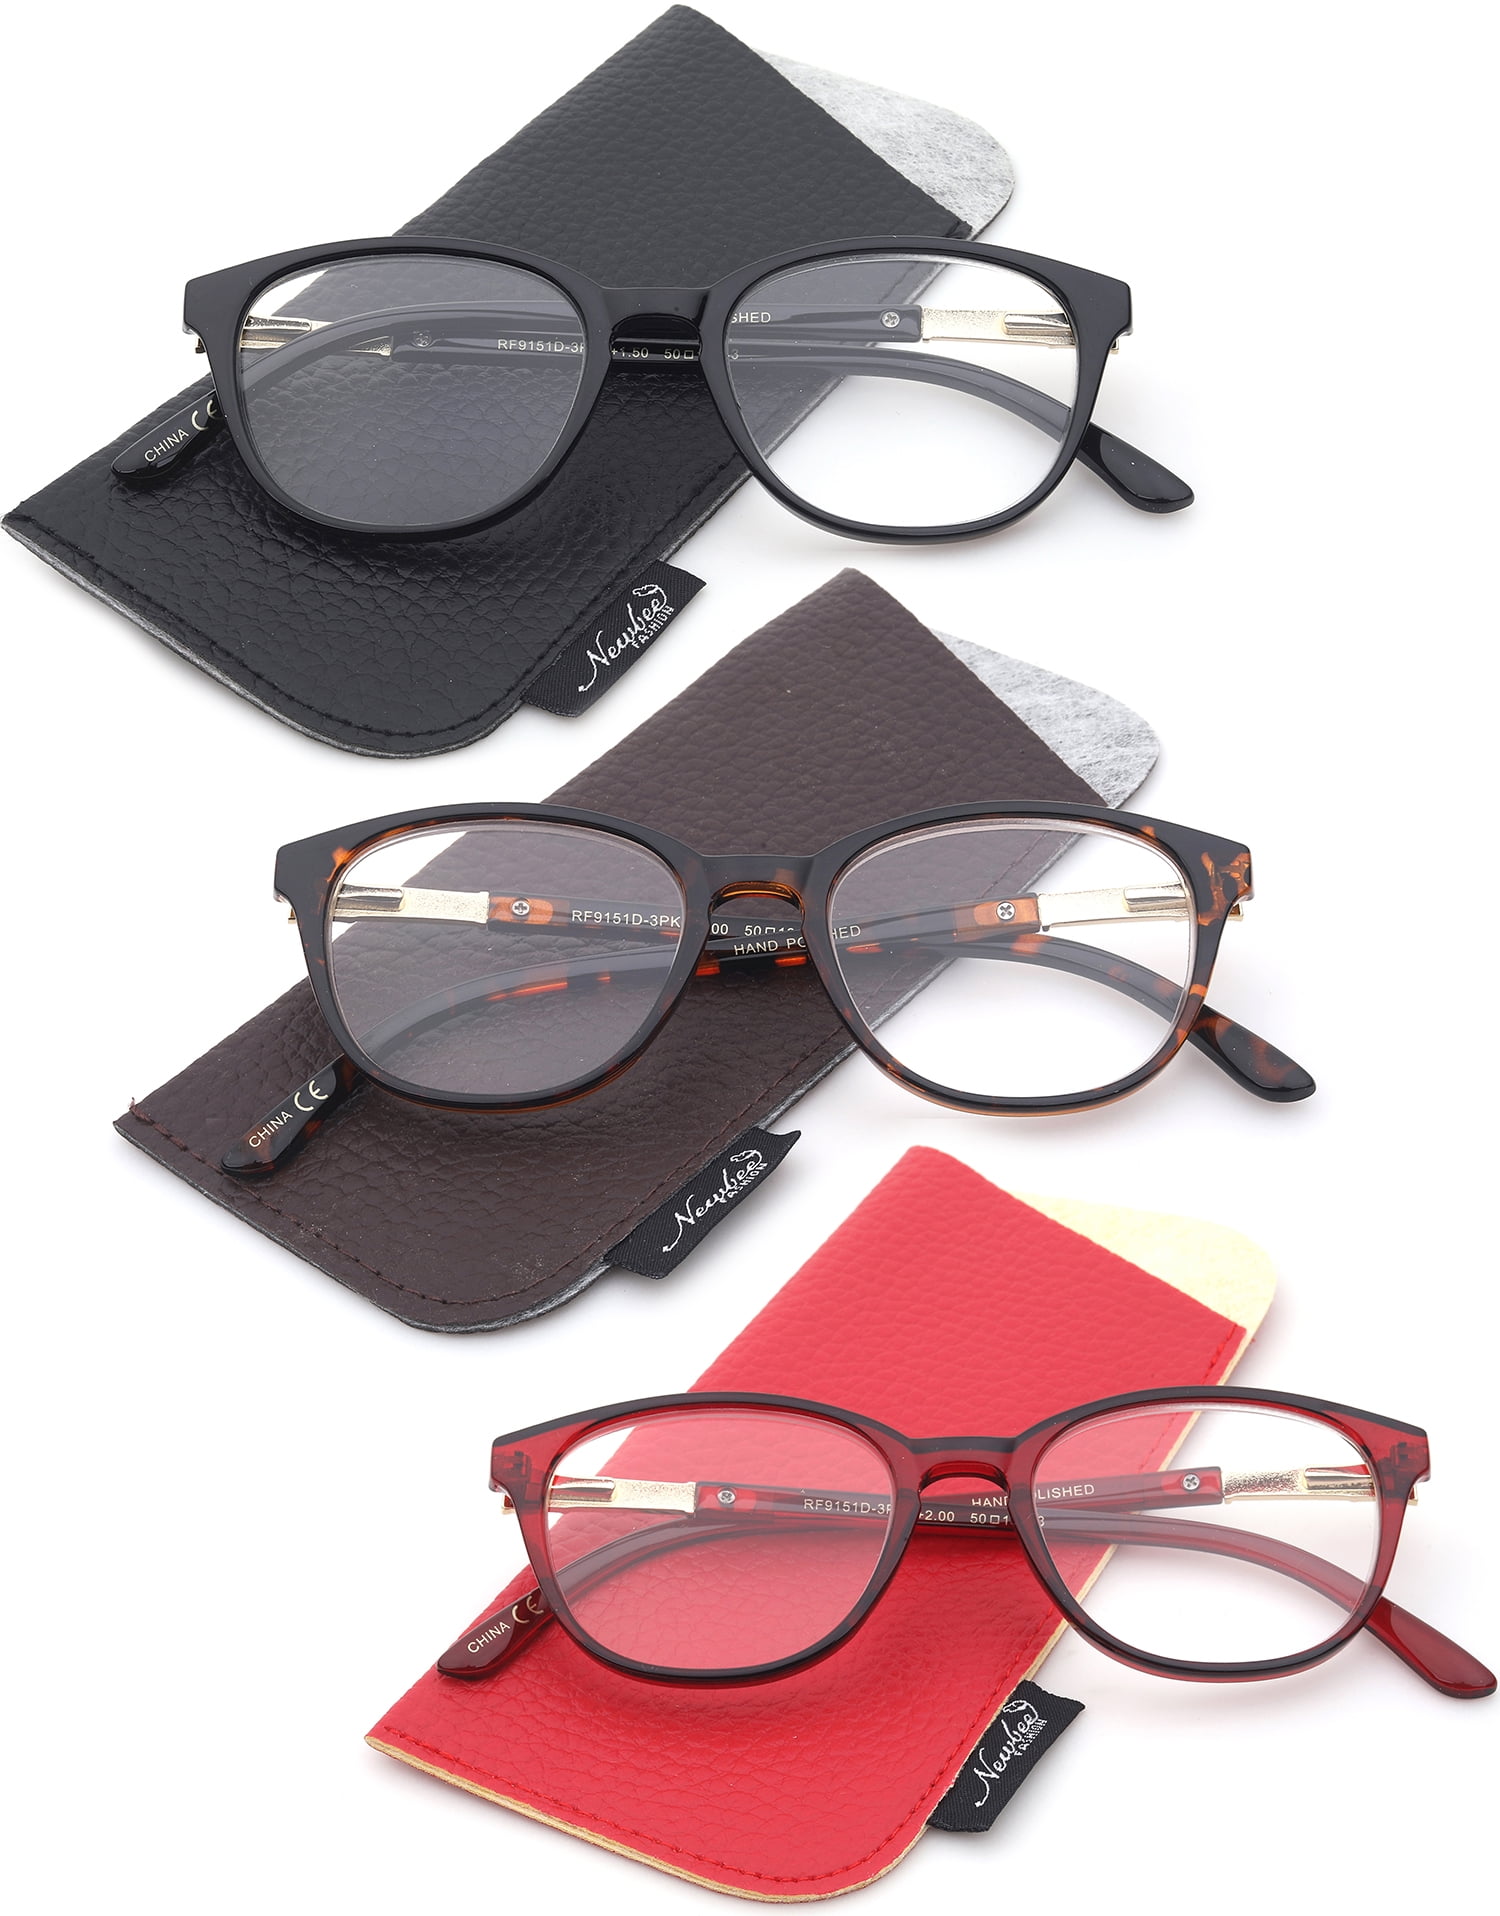 3 Pairs Newbee Fashion Reading Glasses For Women Vintage Style Plastic Frame Metal Spring